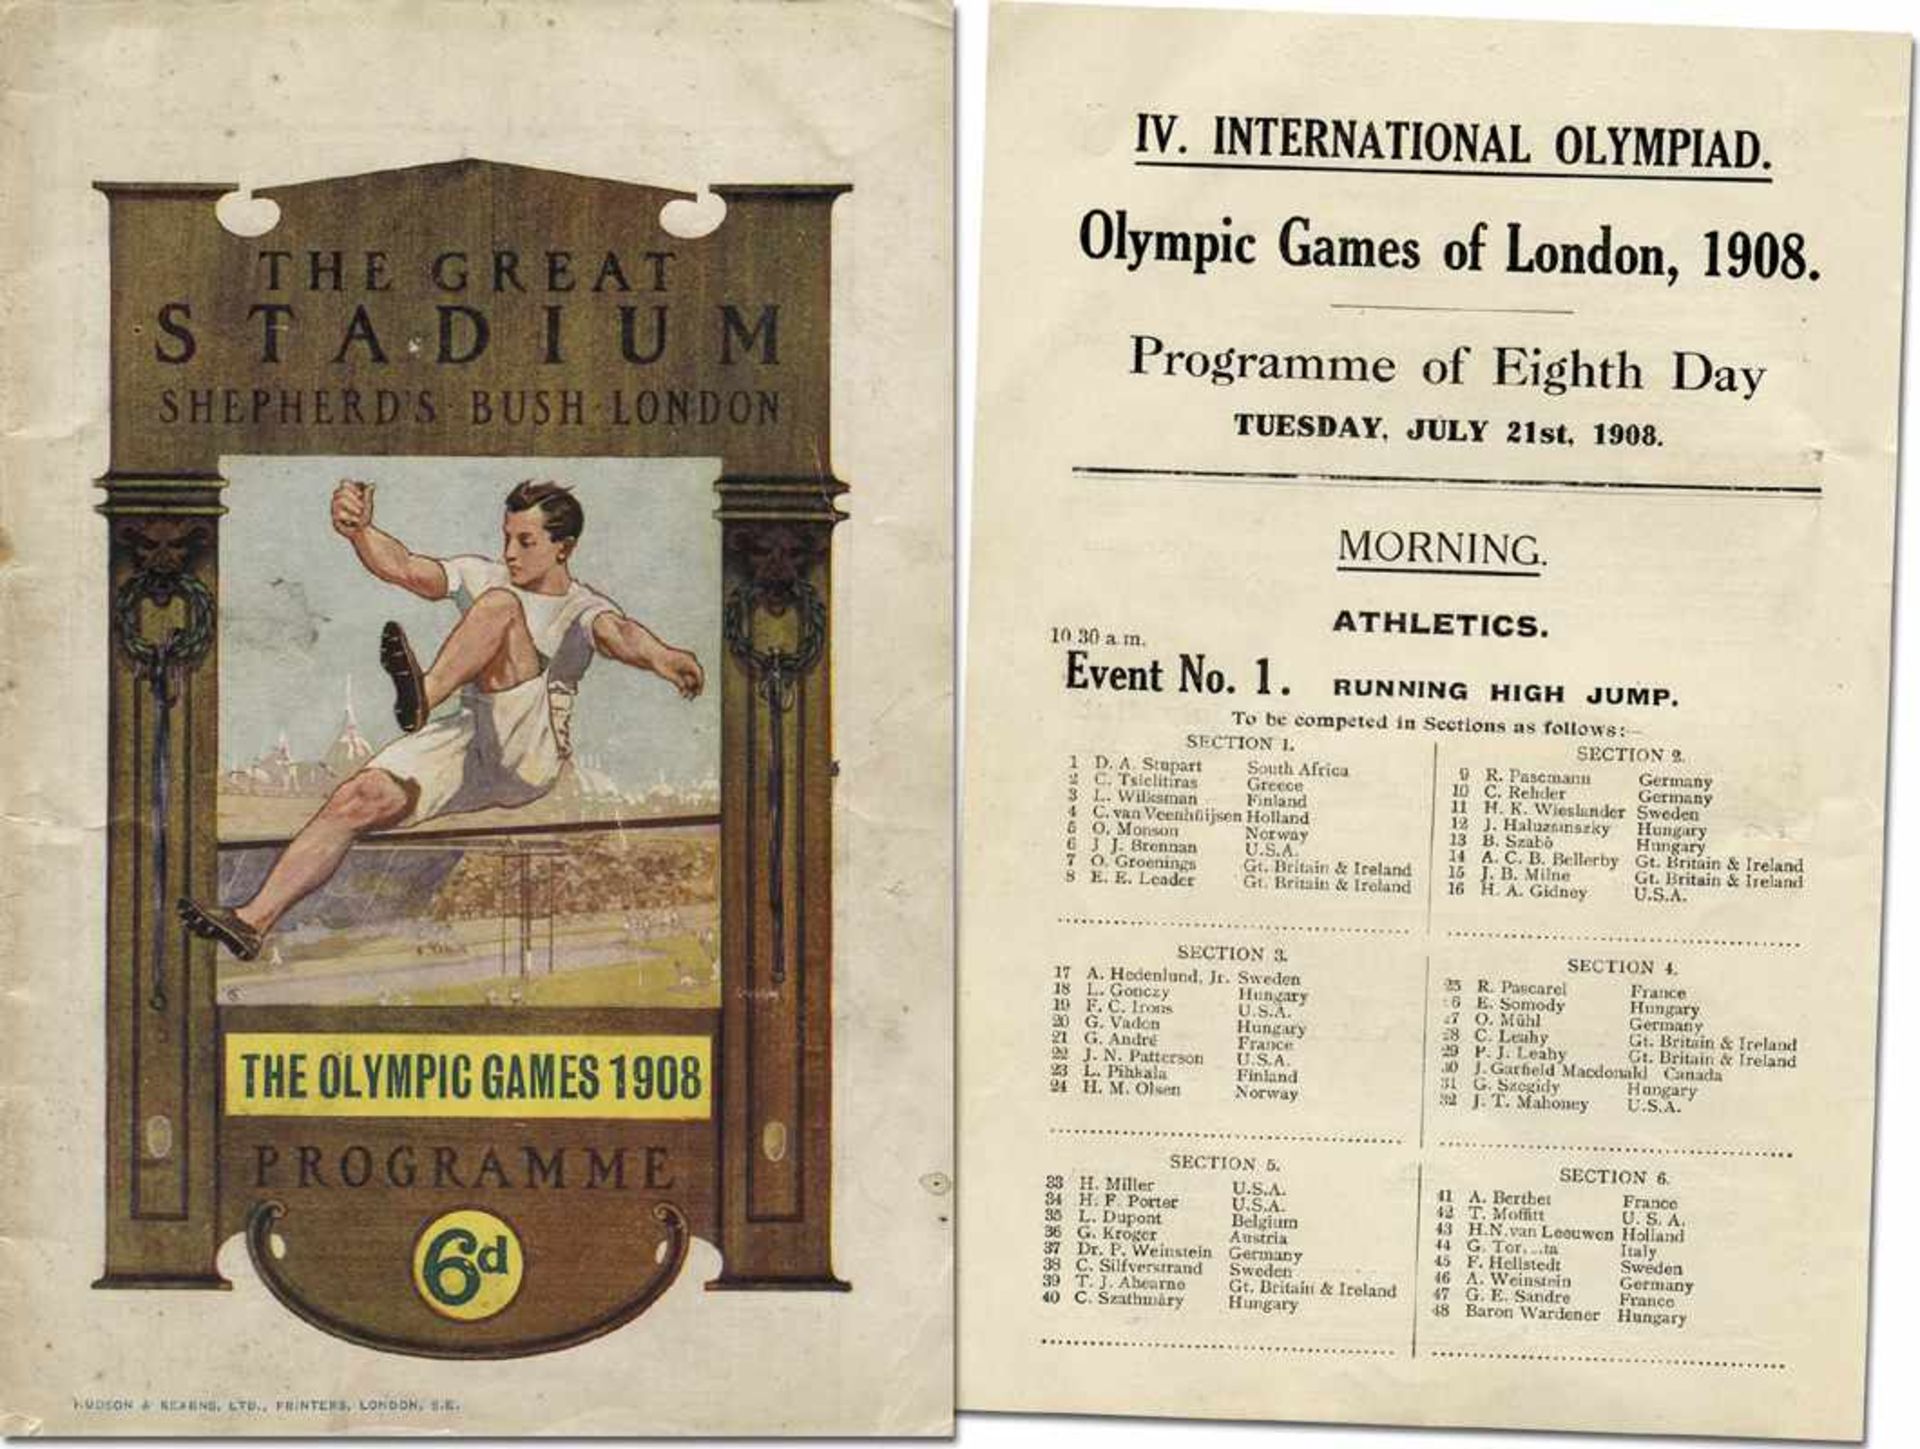 Olympic Games 1908. Official Programm - Olympic Games of London 1908. IV.International Olympiad.